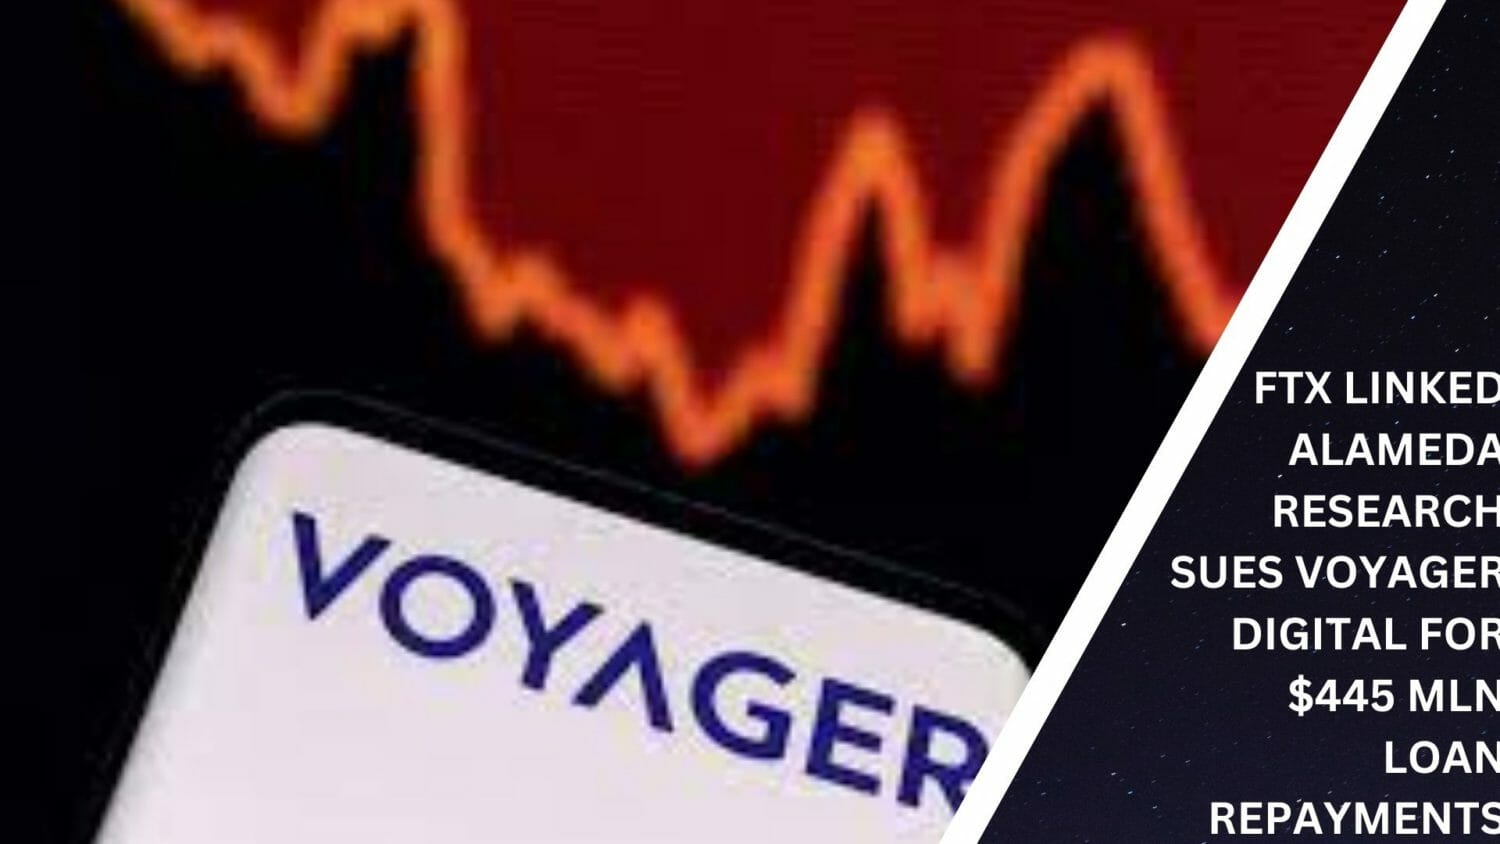 Ftx Linked Alameda Research Sues Voyager Digital For $445 Mln Loan Repayments